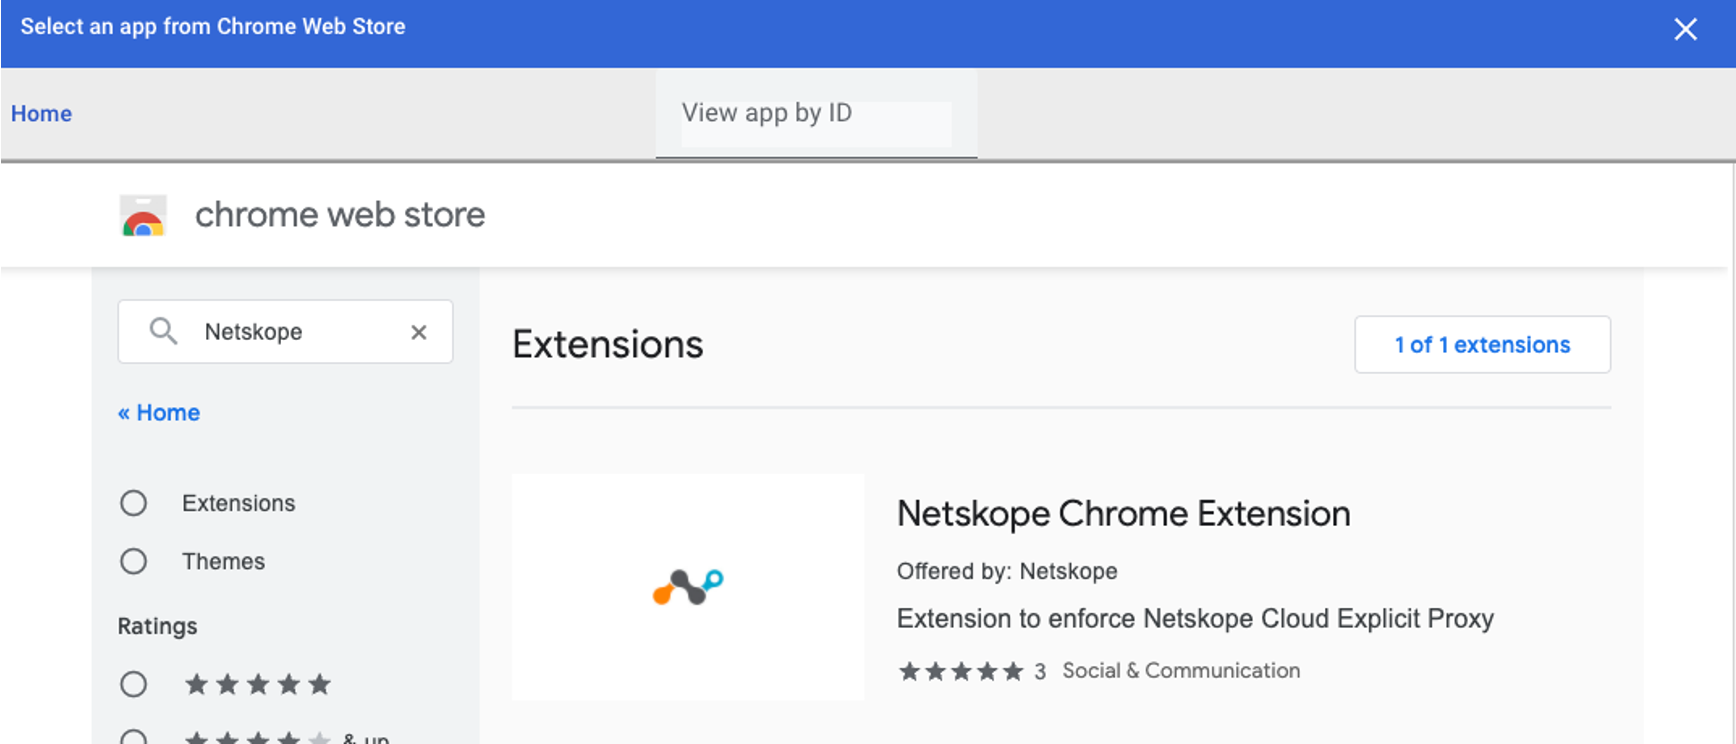 The Netskope Chrome Extension in the Chrome Web Store.